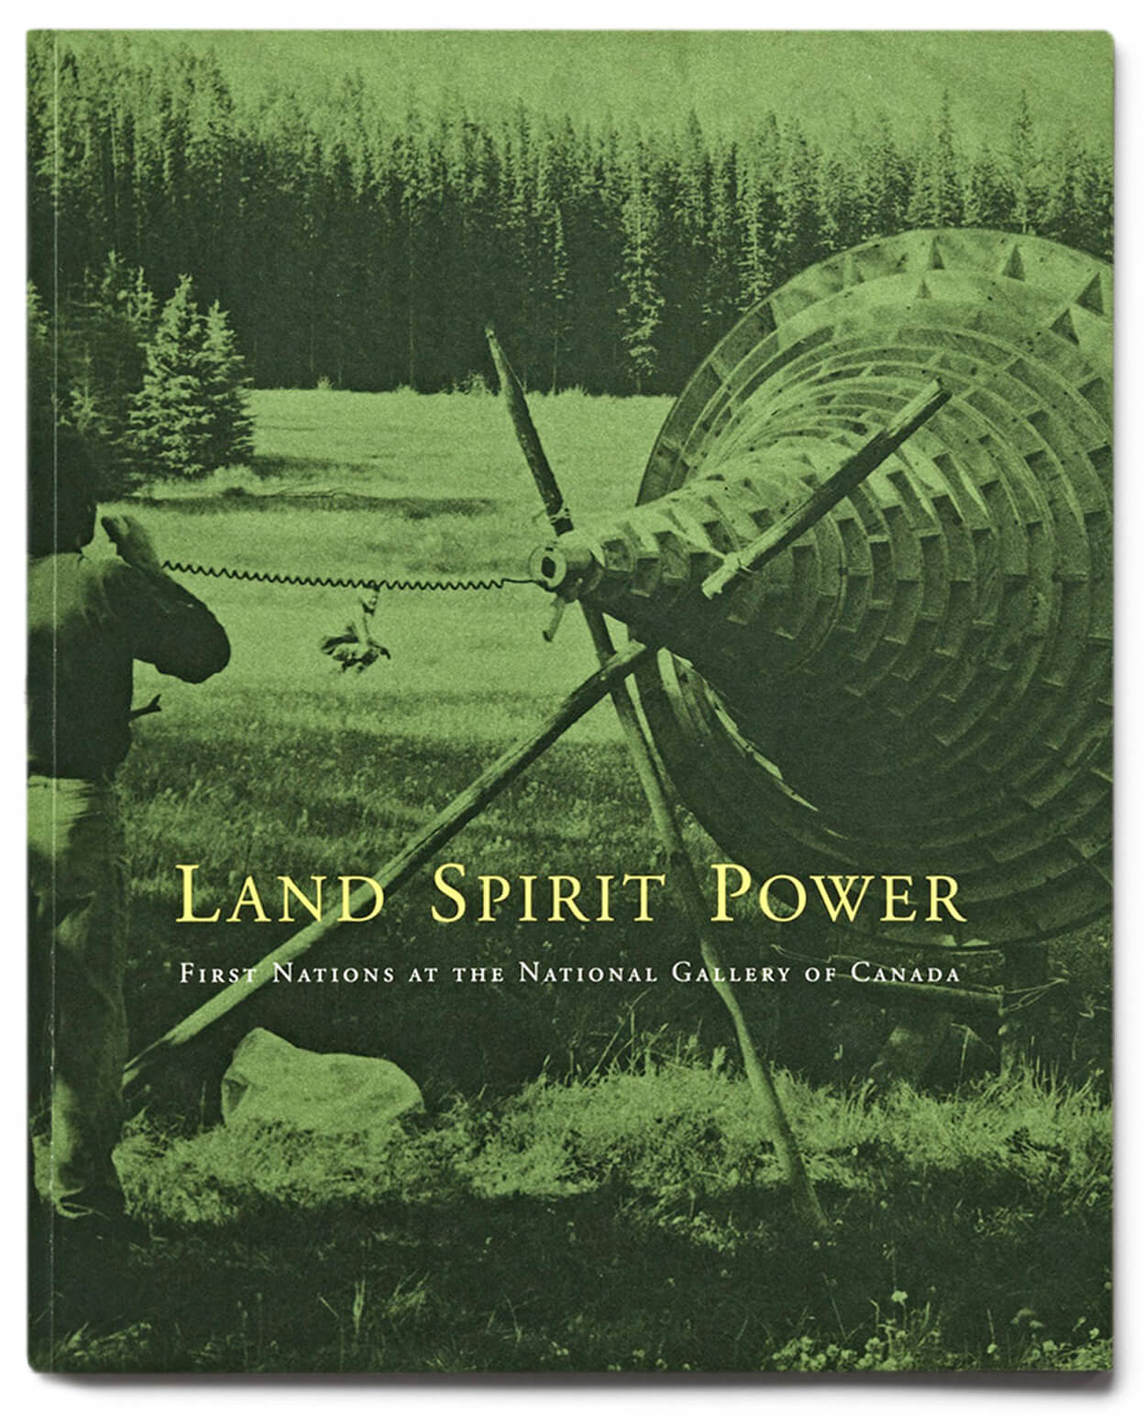 Cover of Land, Spirit, Power exhibition catalogue, 1994